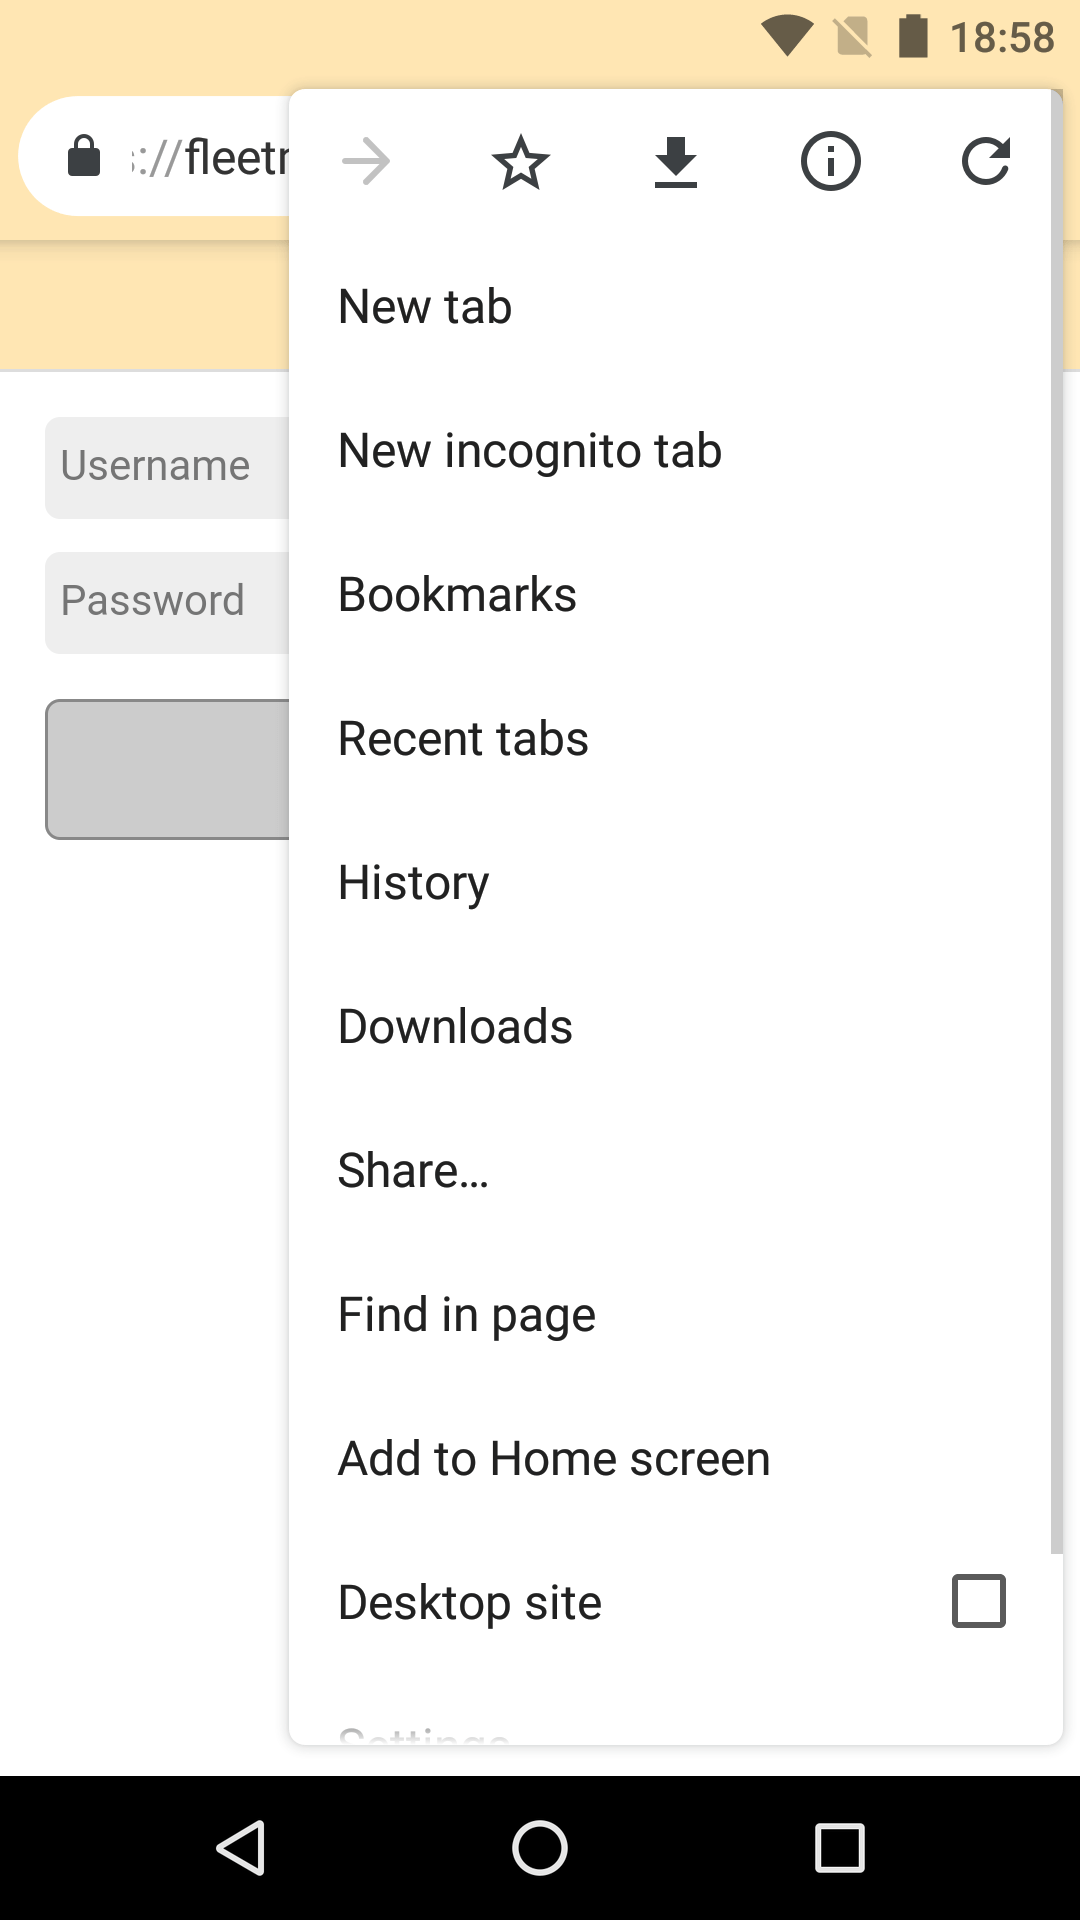 Select „Add to Home screen“